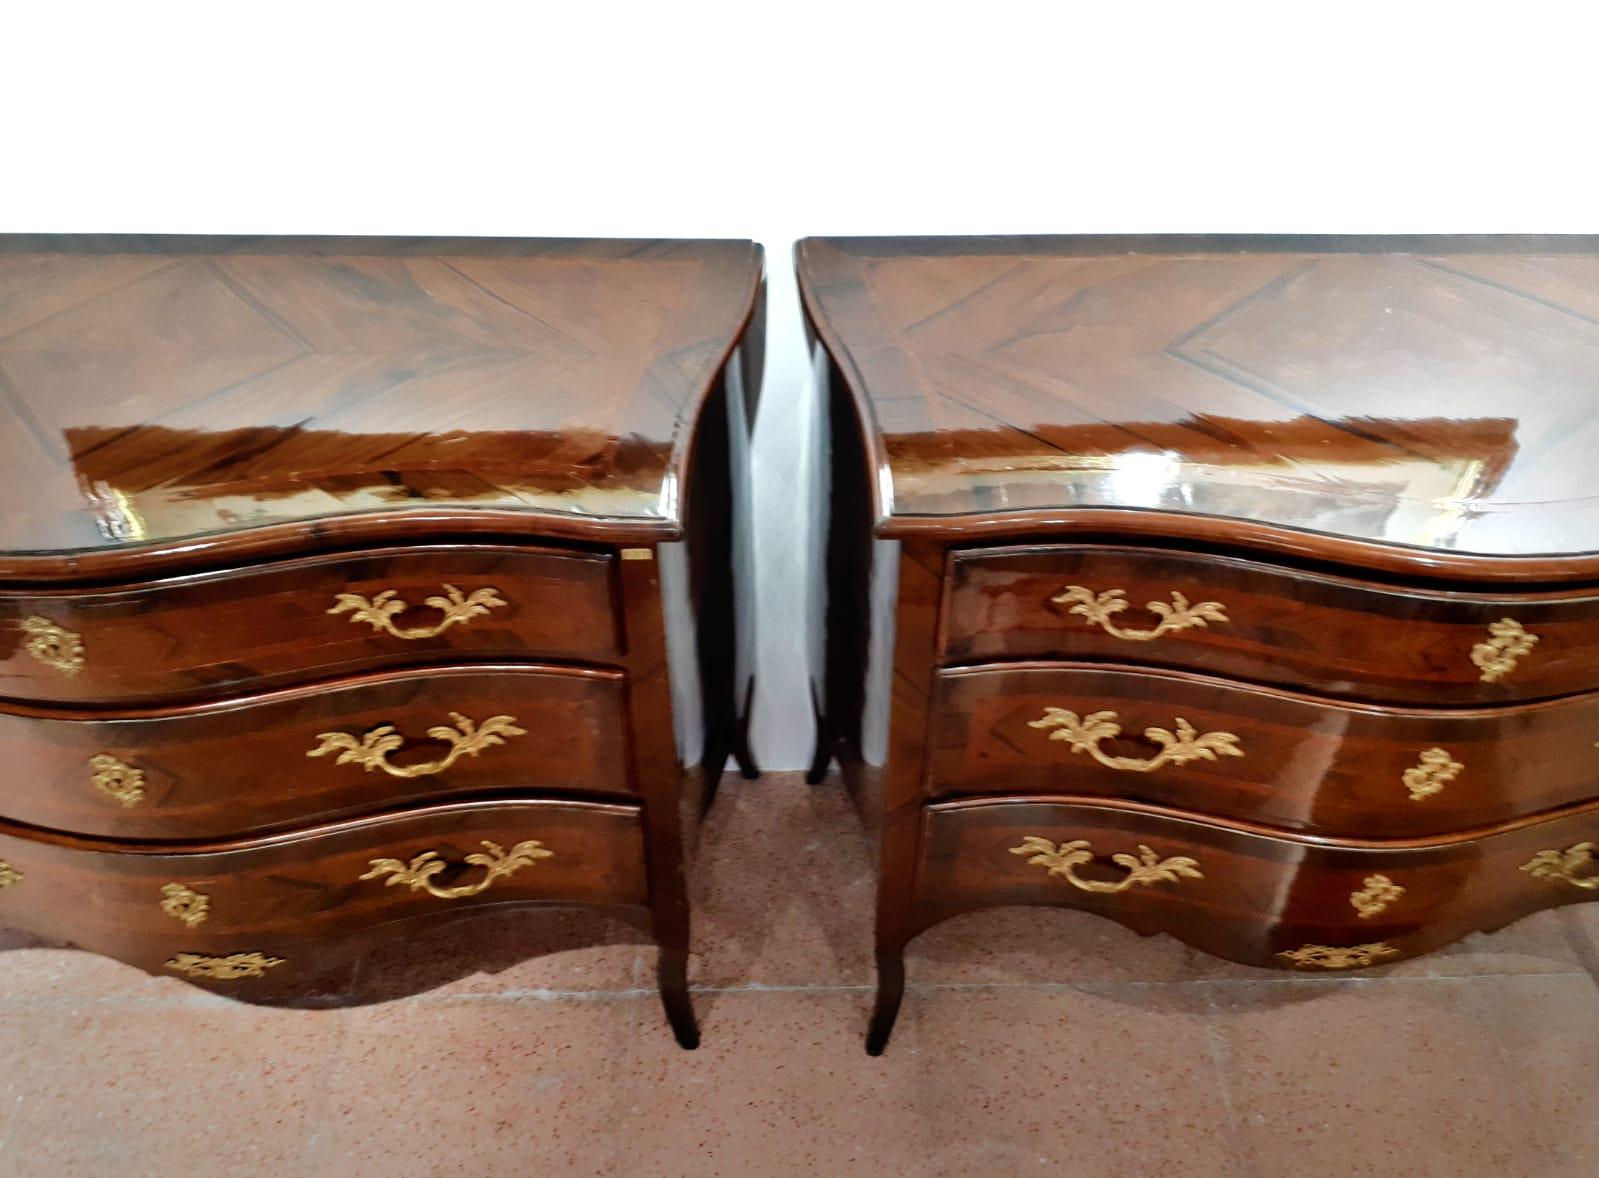 Pair of Italian dresser commodes totally restored, Napoleon III second half of the 19th century. Walnut, bronze details, inlaid, three drawers, with four working keys. Very rare. 

Two beautiful Italian quality chests of drawers, made of walnut wood